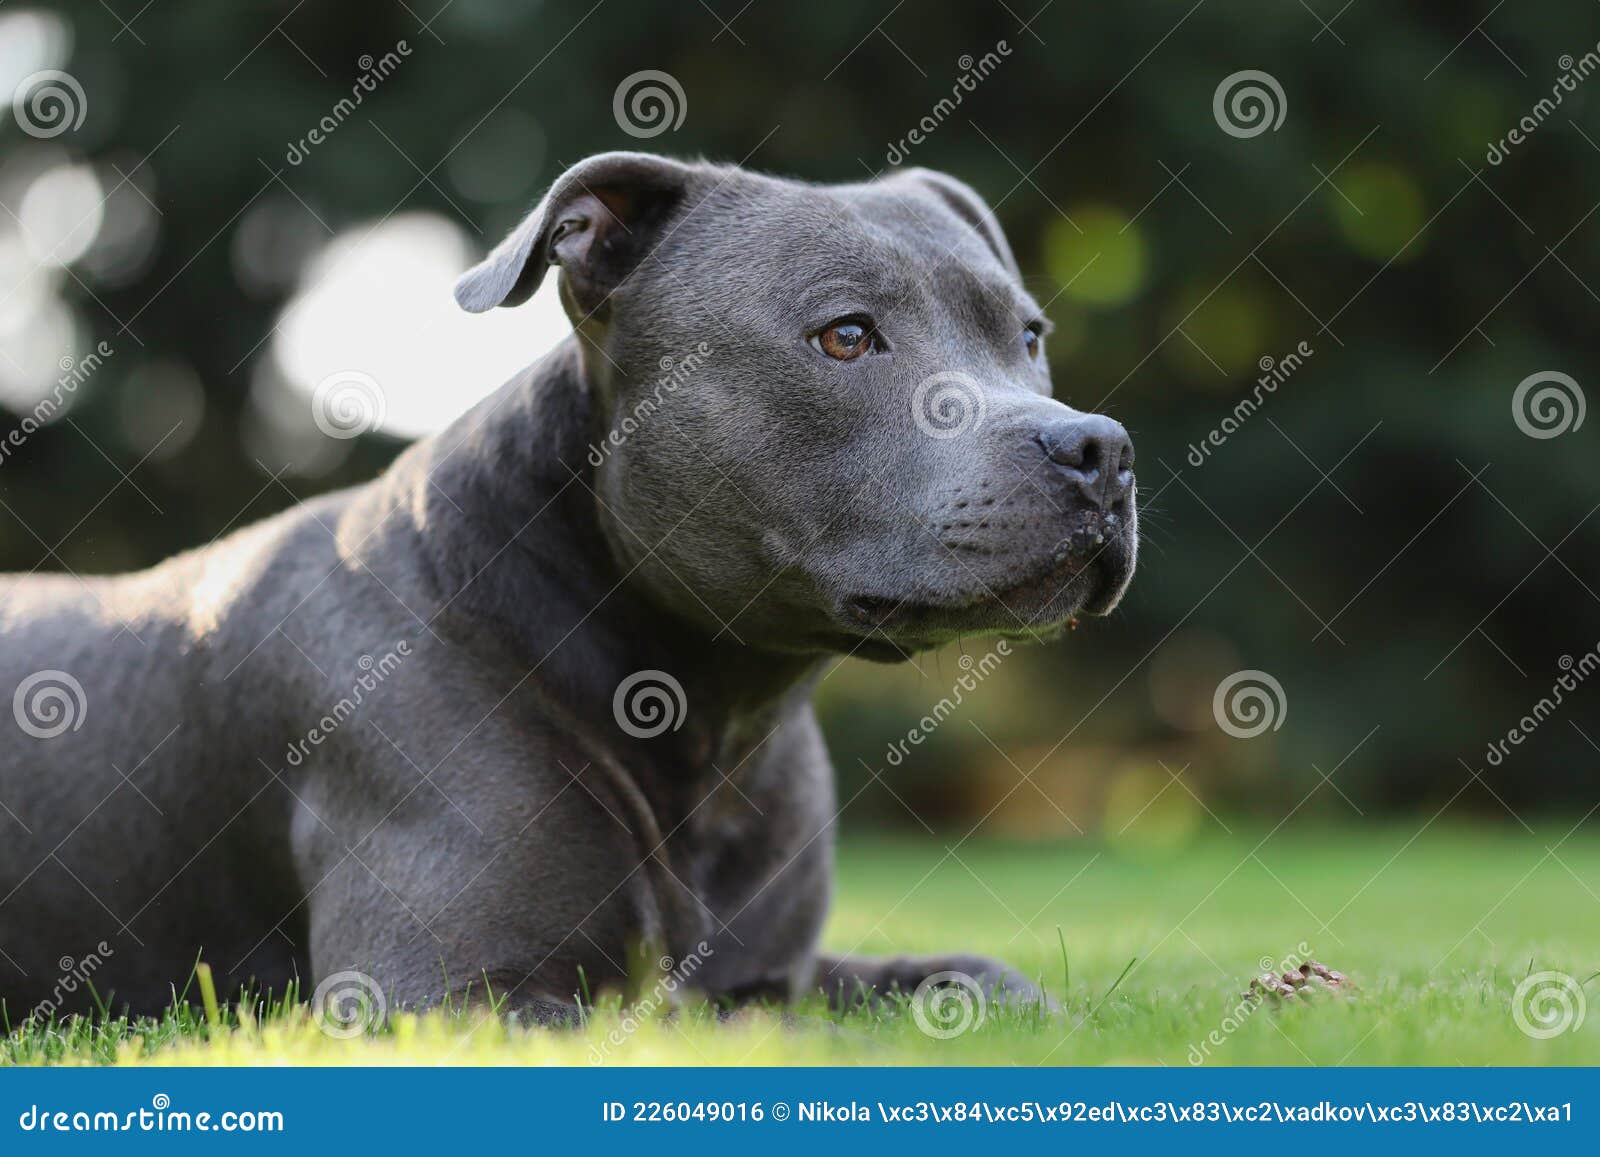 Adorable Blue To the Right in the Garden Stock Photo Image of look, 226049016